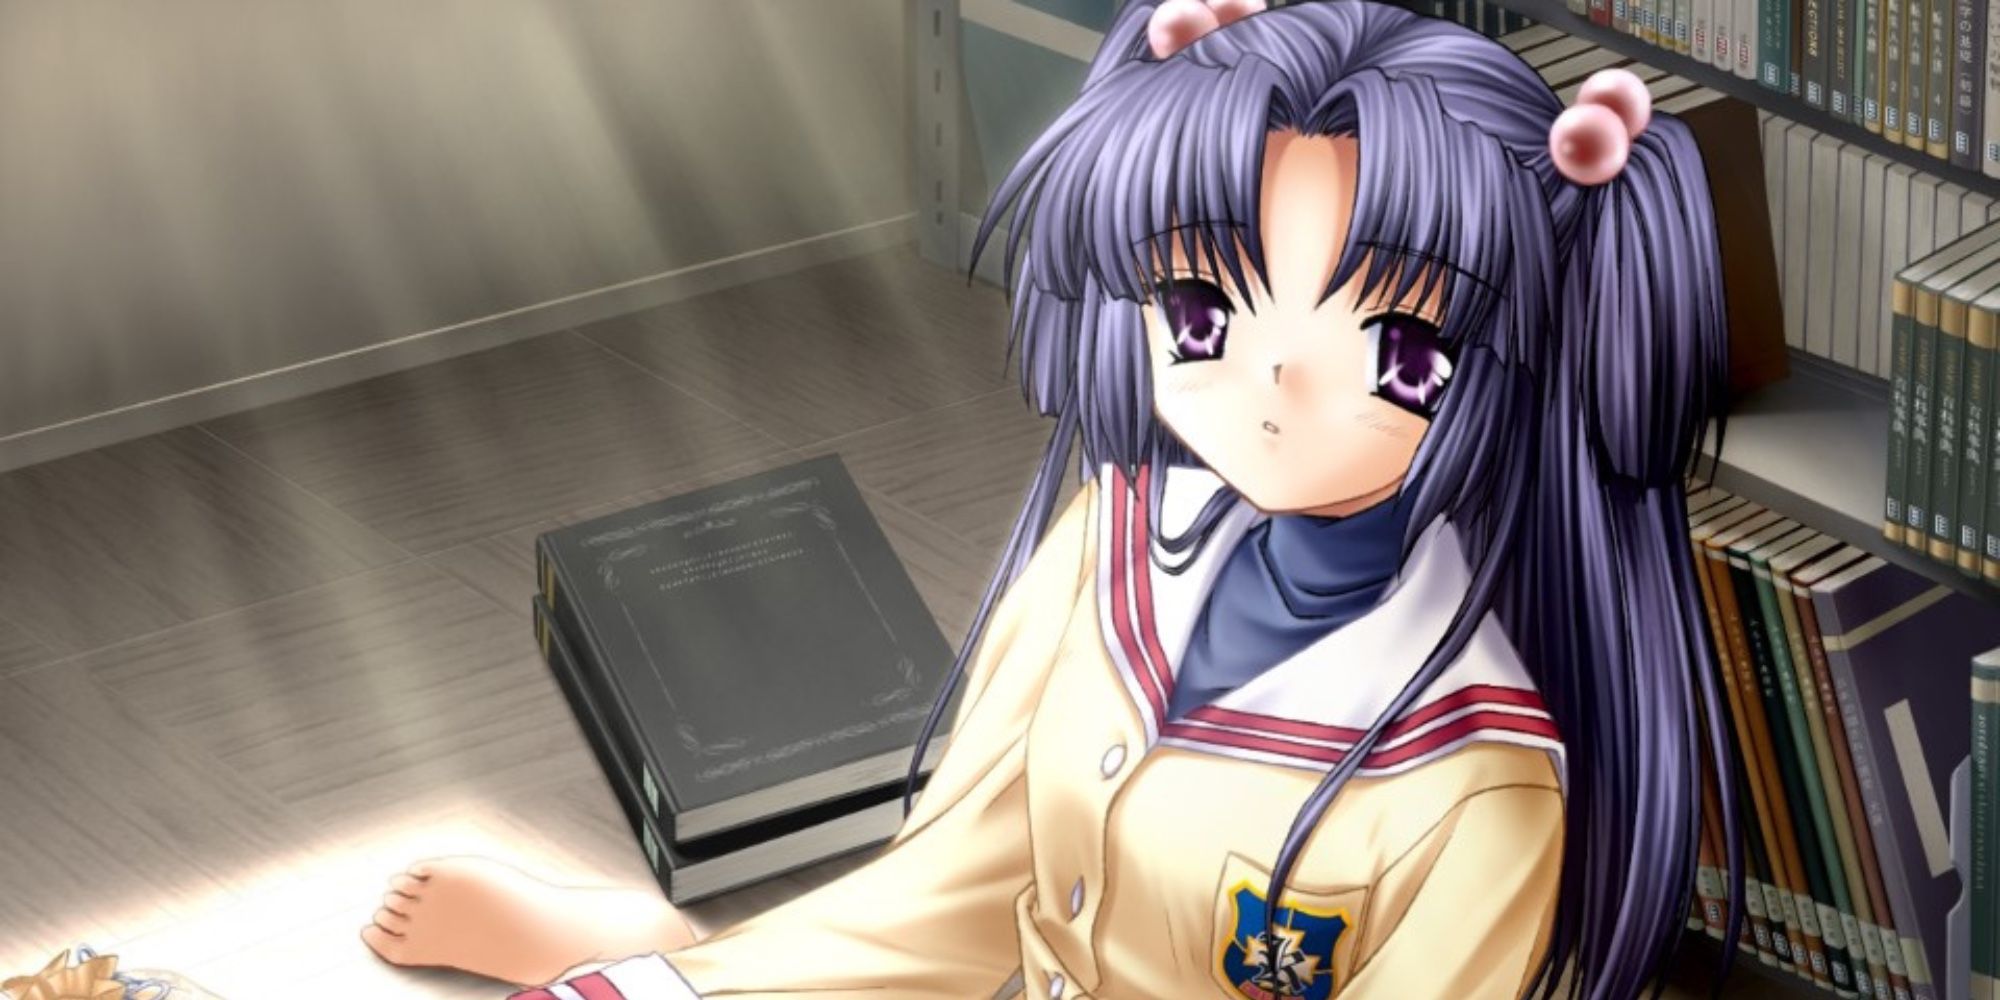 Underrated Visual Novels - Clannad - Player studying in a room